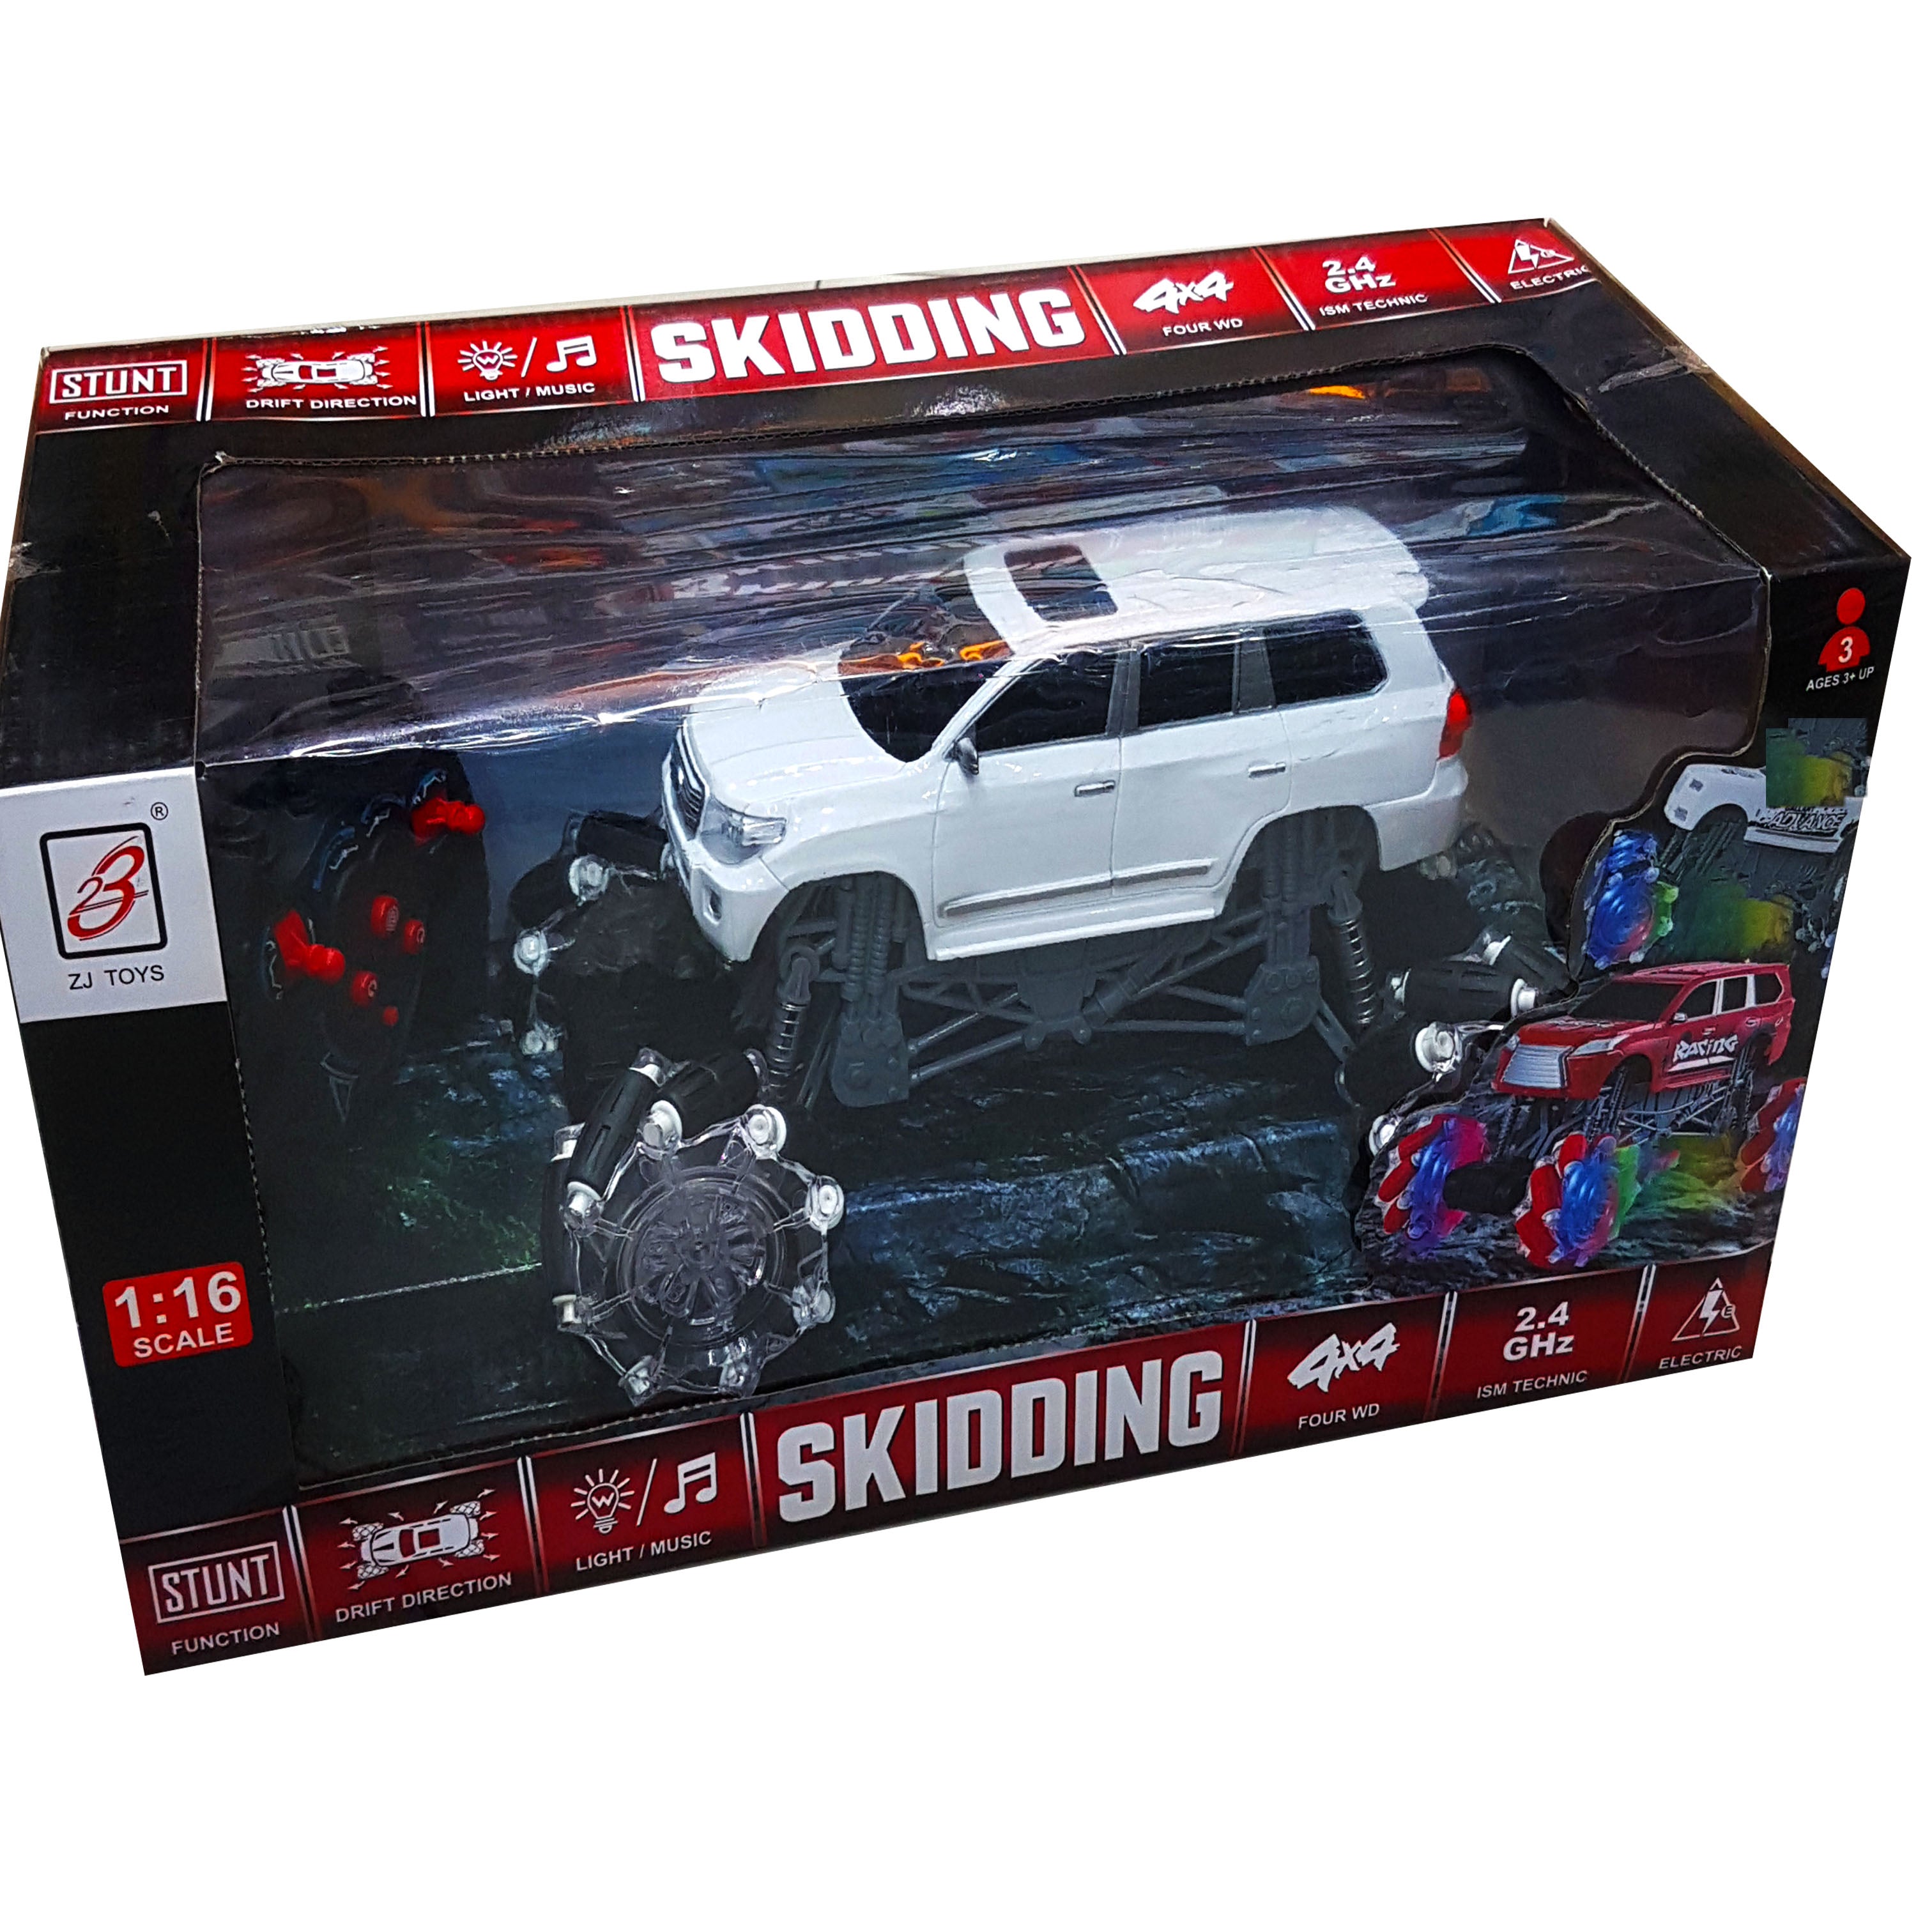 New Arrival 2023: 4x4 Remote Control Stunt Car with Lights & Music - 2.4GHz High-Speed RC Car, Perfect Boys' Toy Gift